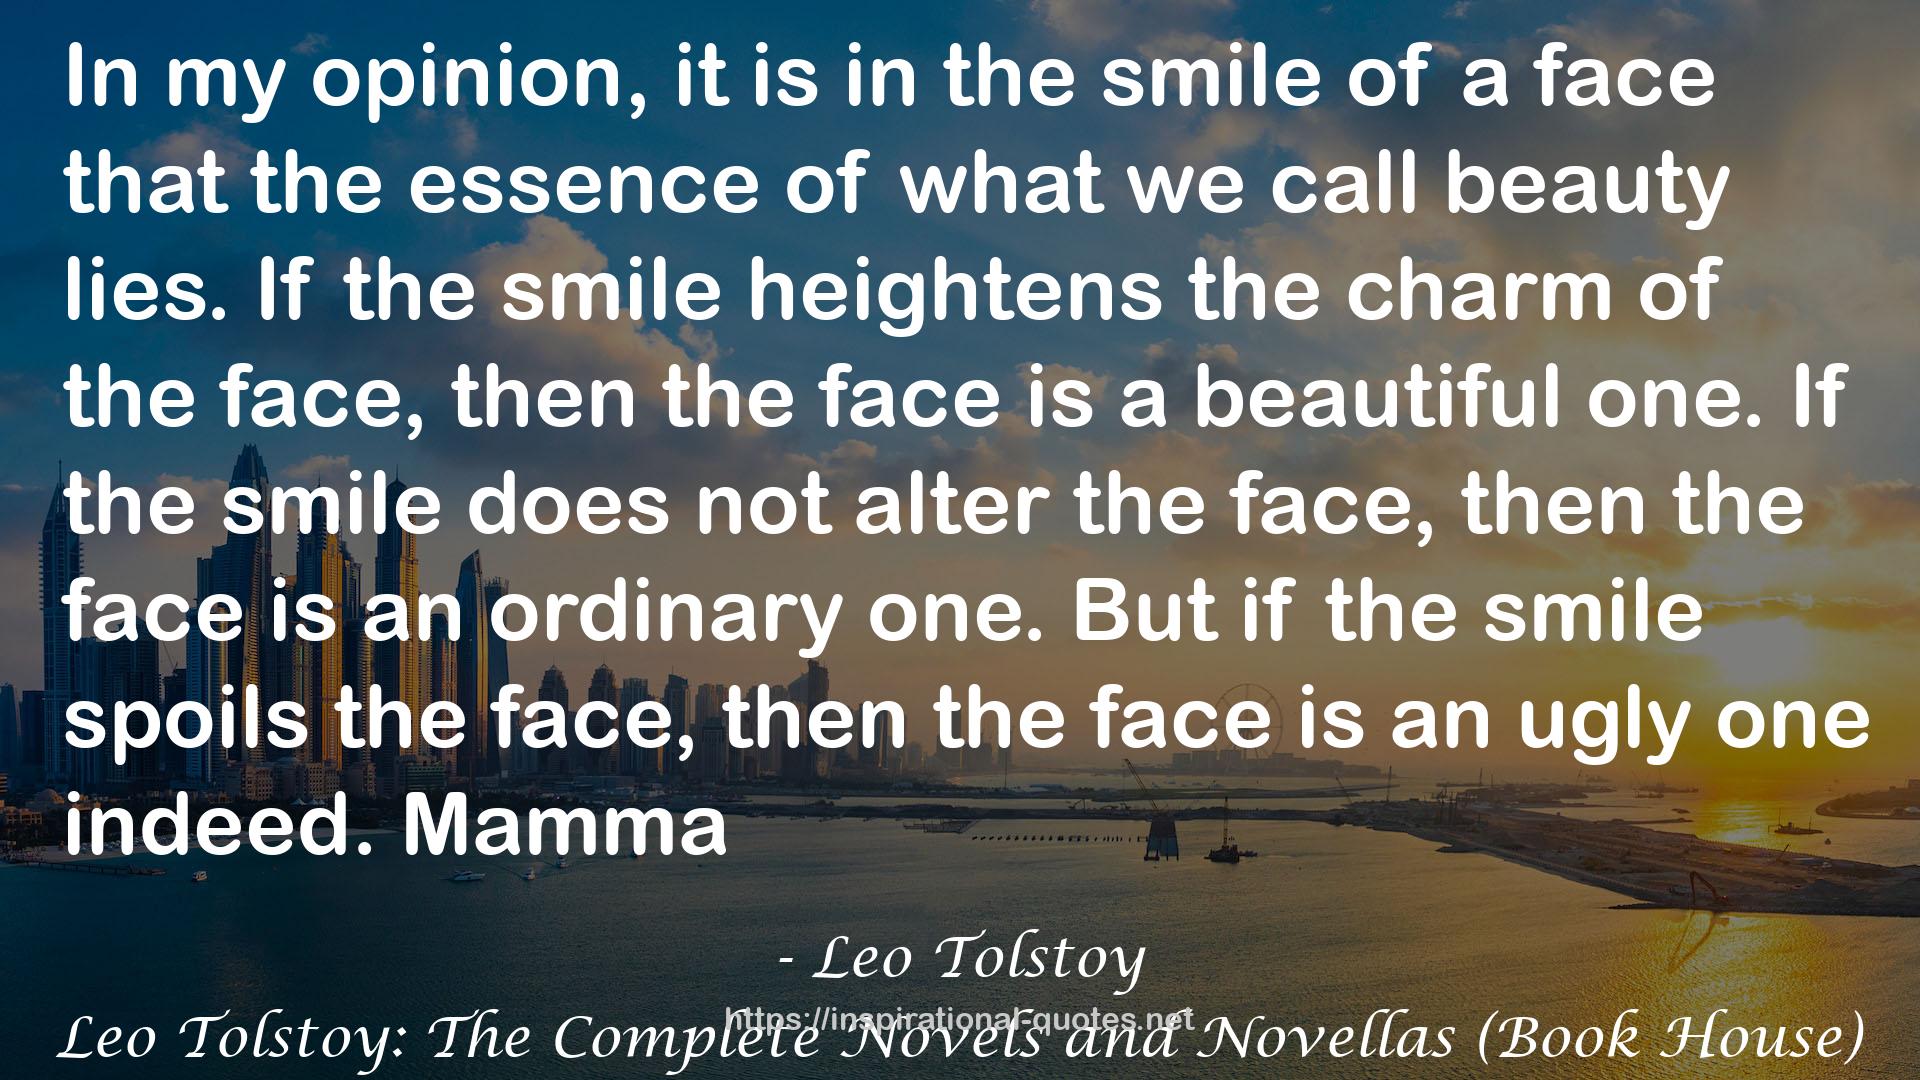 Leo Tolstoy: The Complete Novels and Novellas (Book House) QUOTES